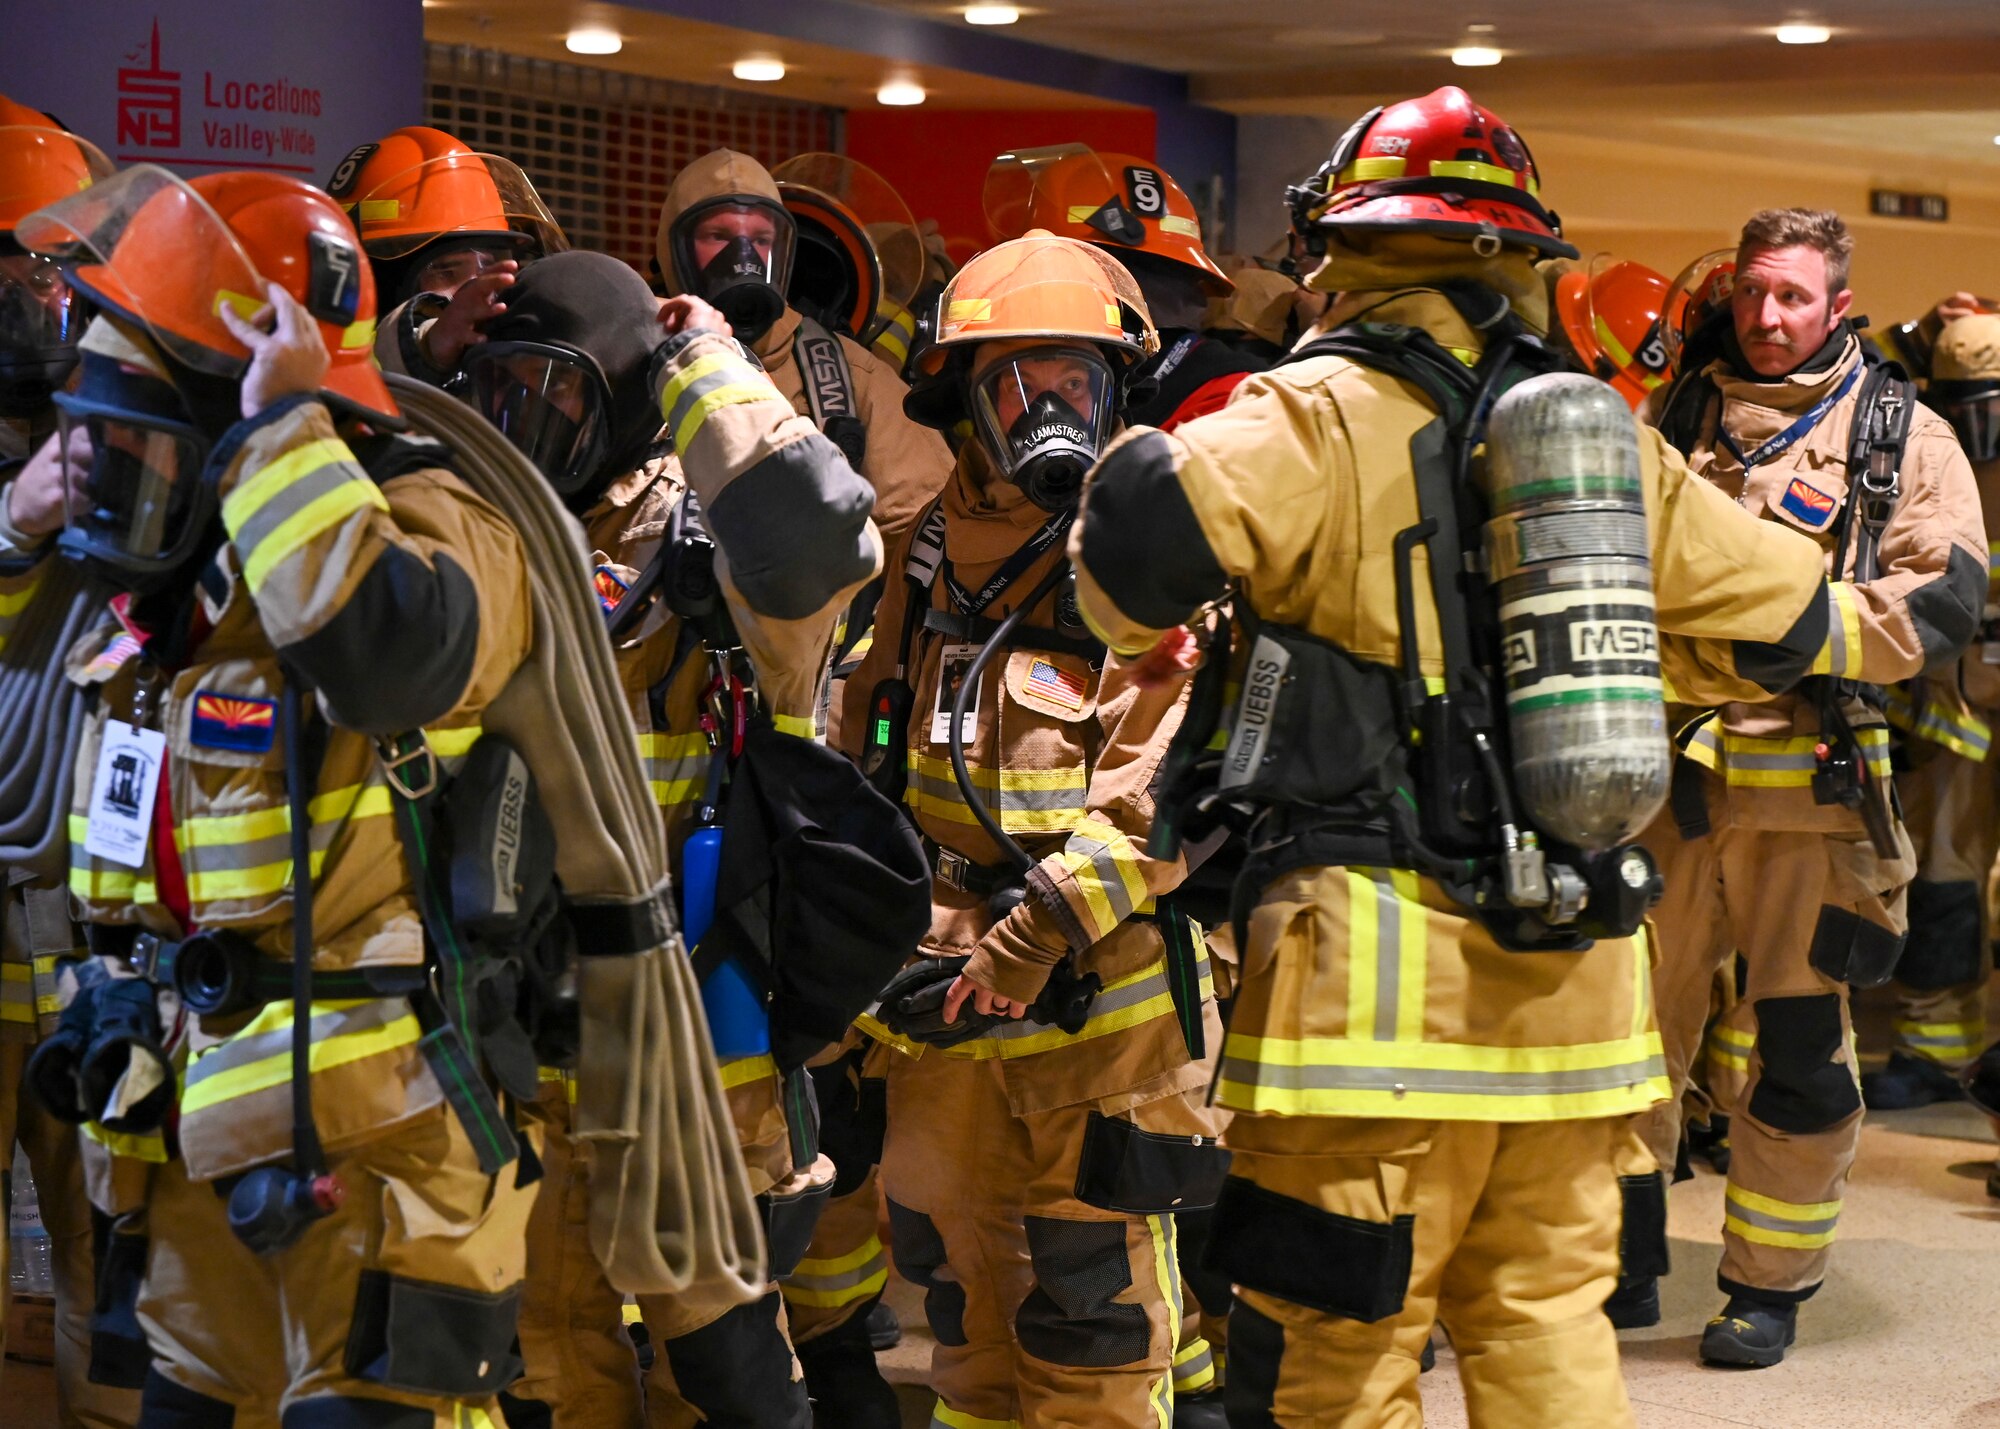 Firefighters prepare for the 9/11 Tower Challenge at Gila River Arena Sept. 11, 2021 in Glendale, Arizona.